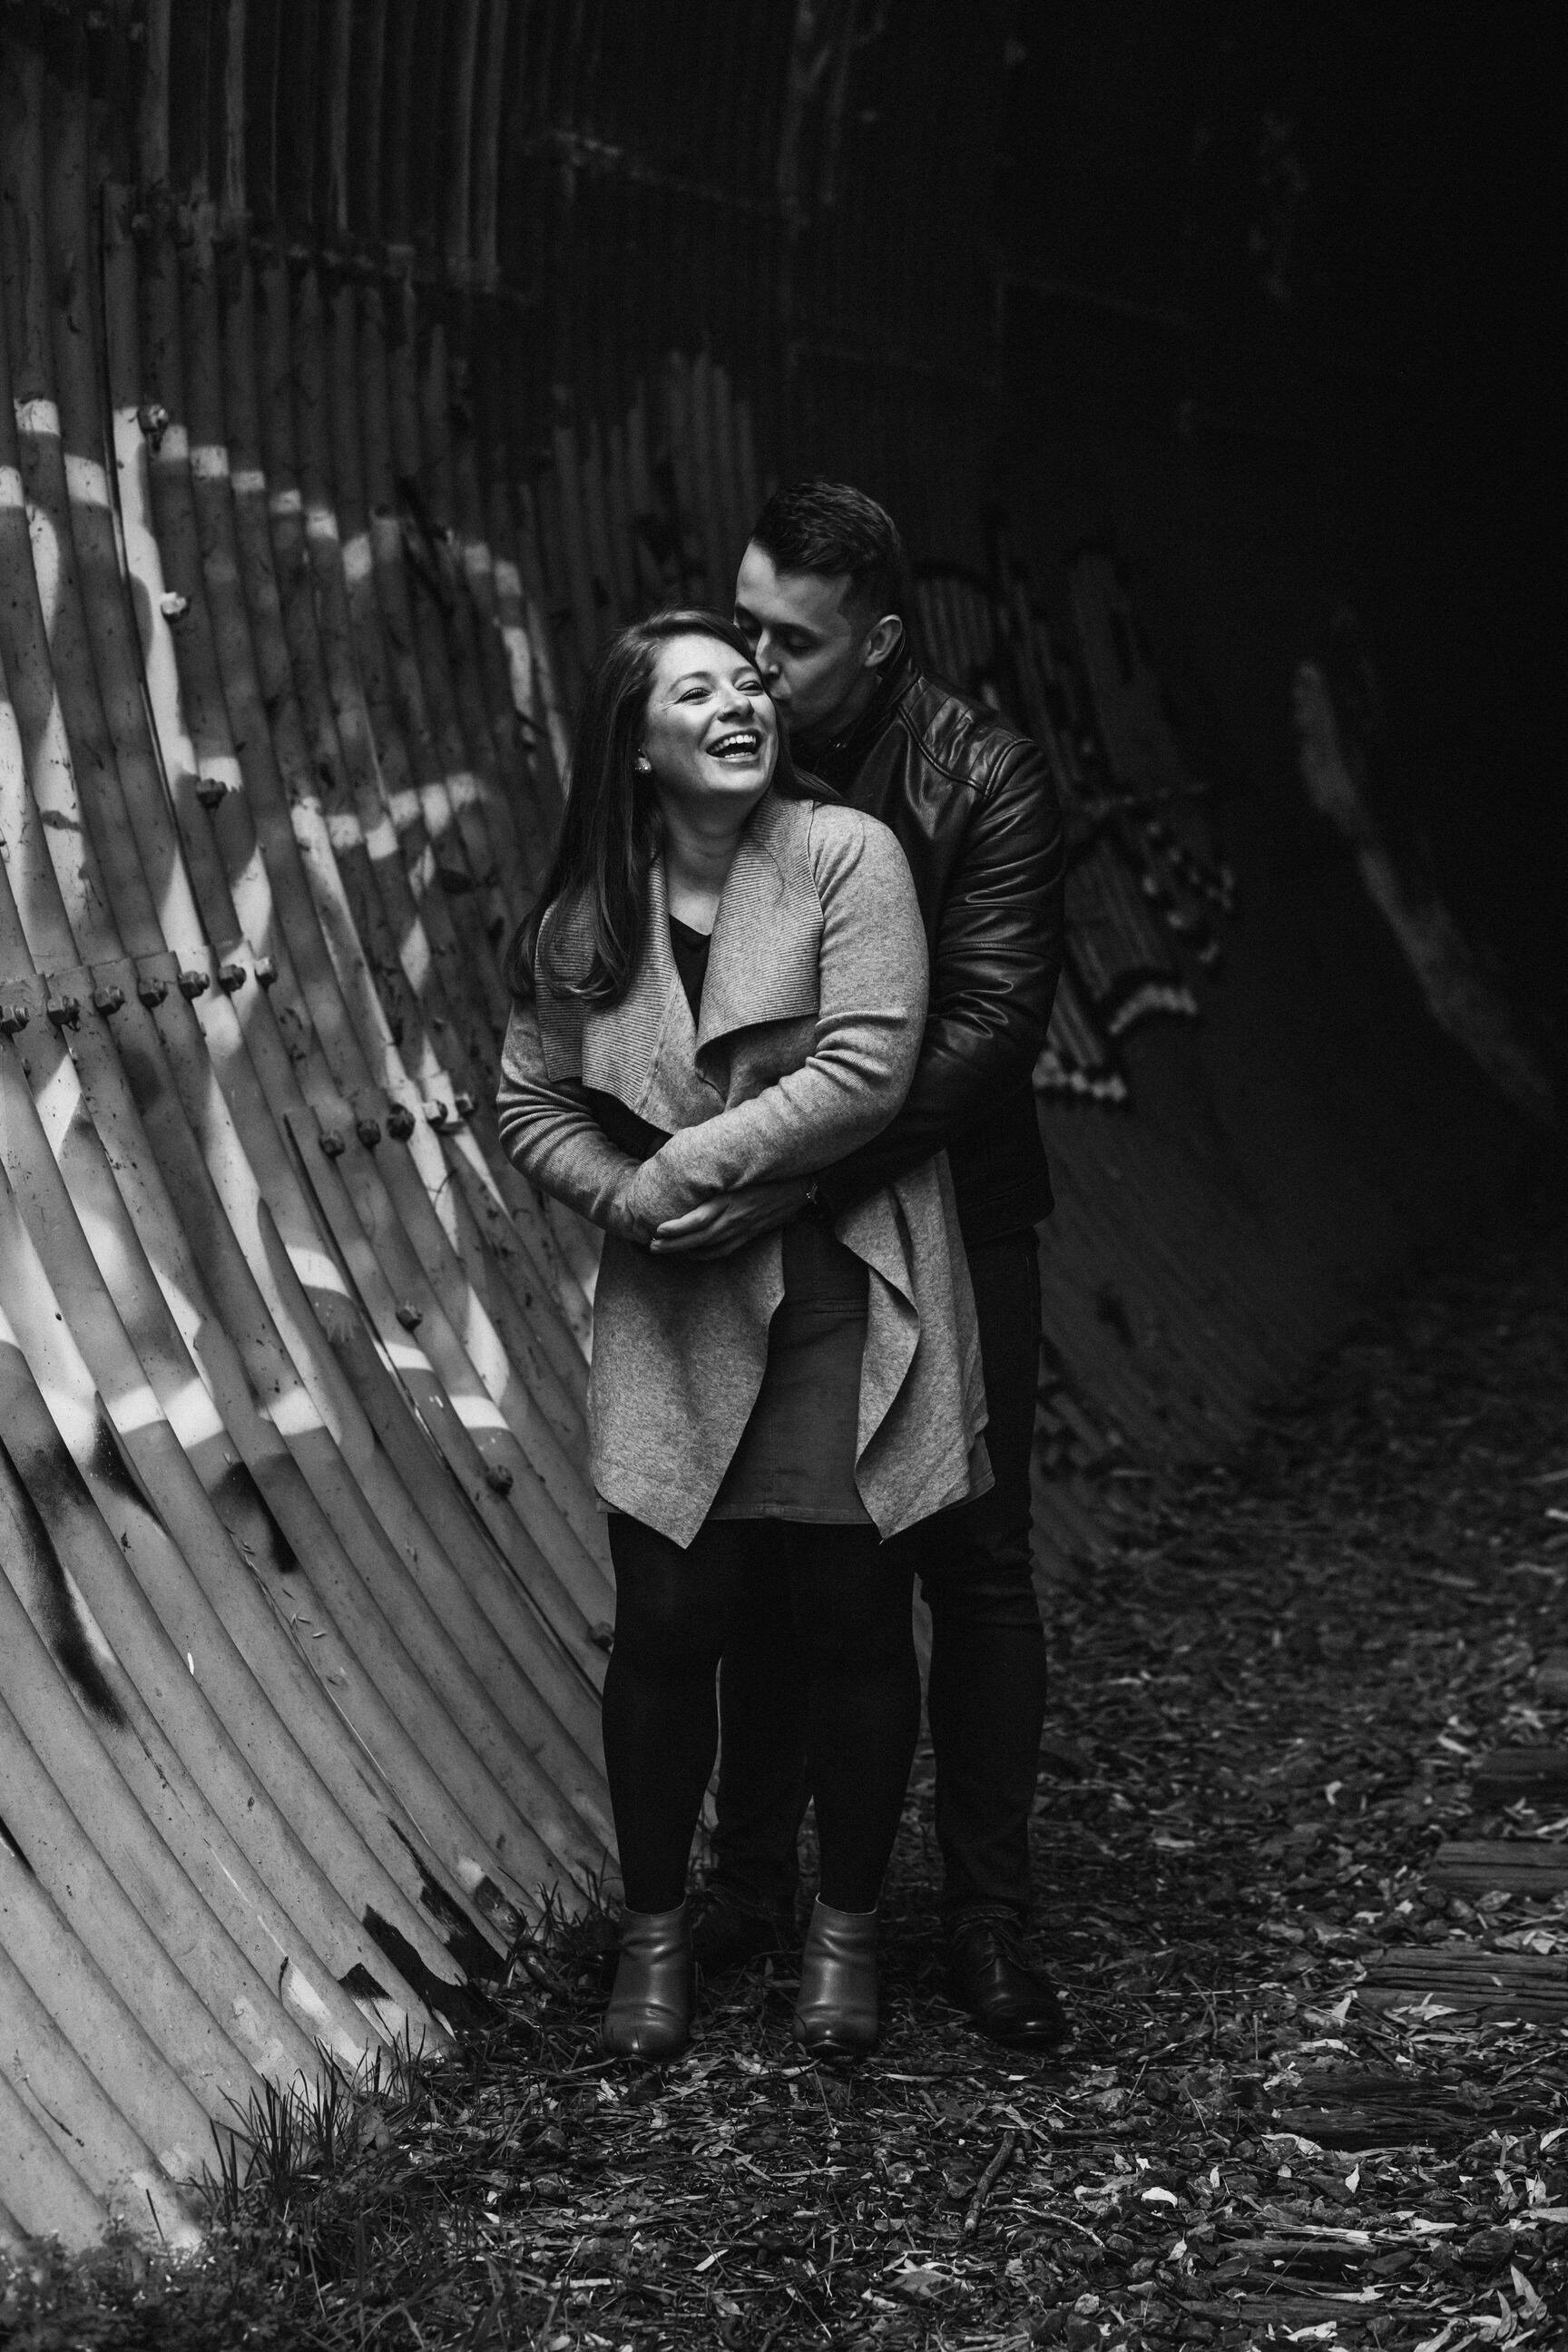 Wintery Autumn Adelaide Hills Engagement Session 06.JPG